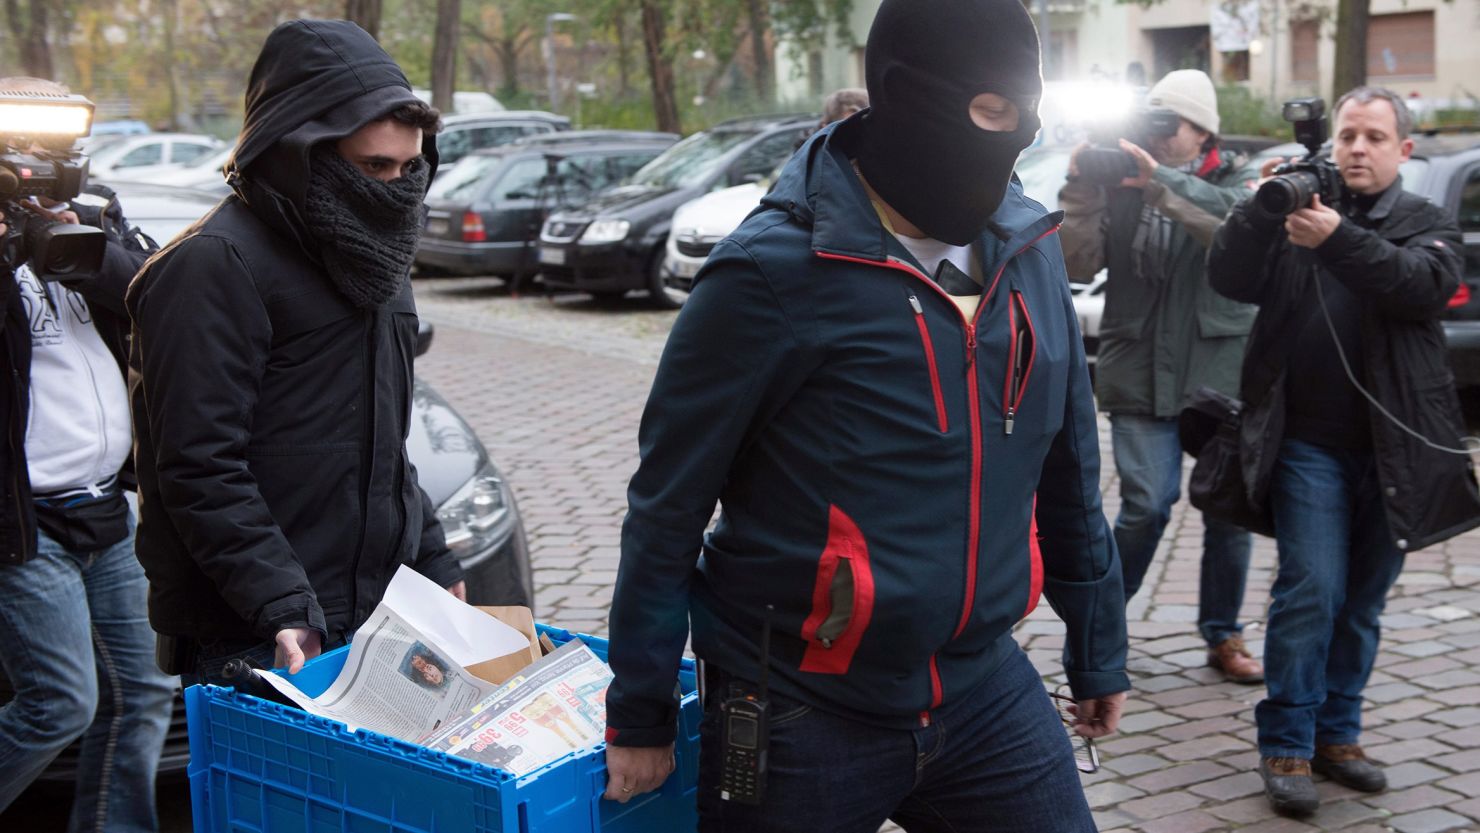 Police officers seize evidence in a raid on The True Religion Islamist organization in Berlin on Tuesday.